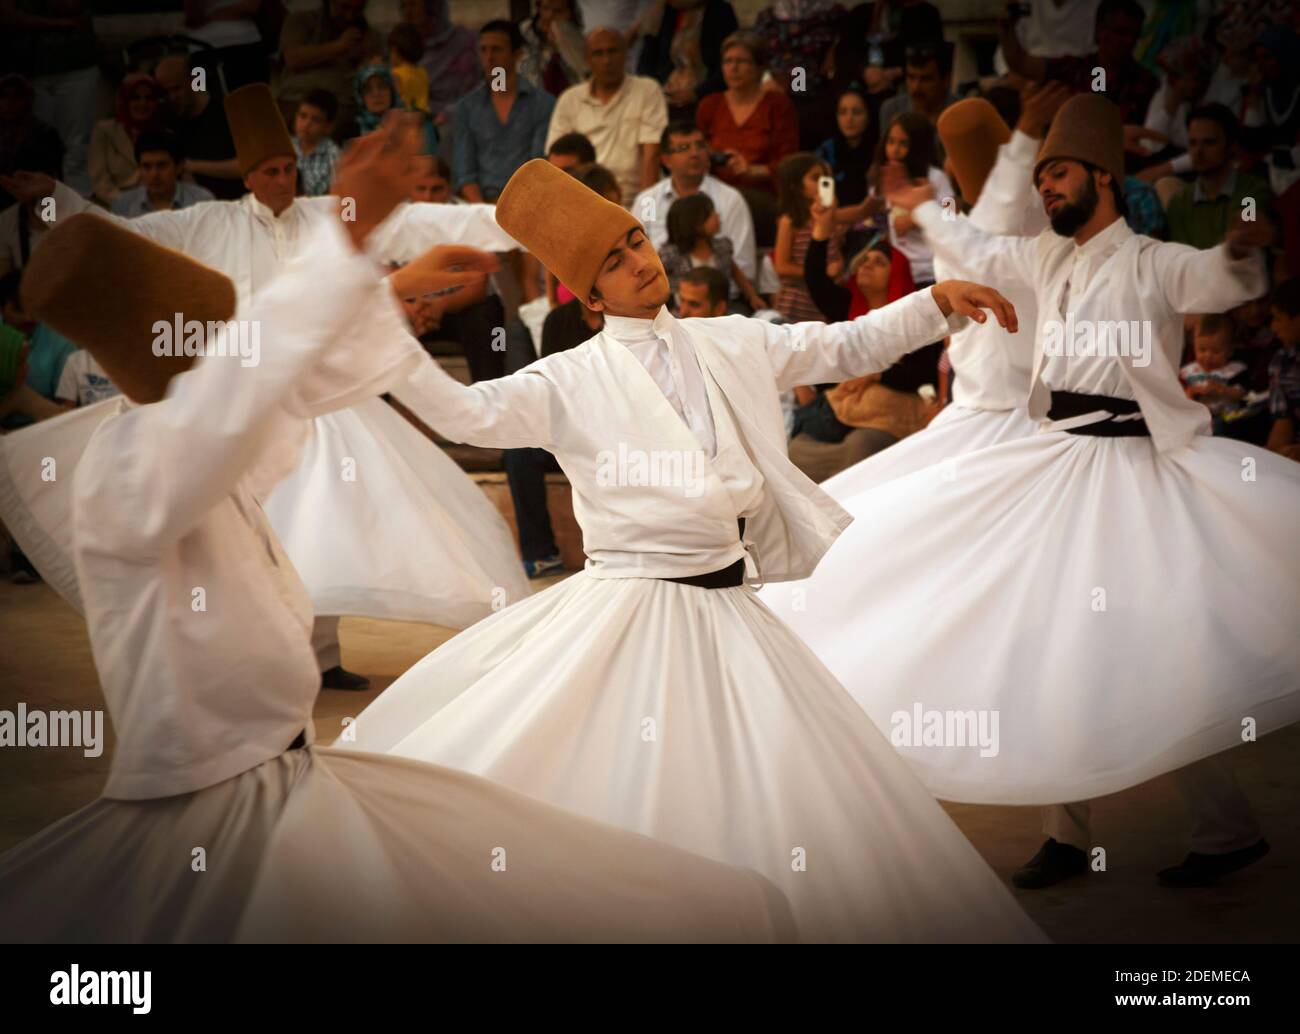 Konya, Konya Province, Turkey. Whirling Dervishes. UNESCO proclaimed the 'The Mevlevi Sema Ceremony' of Turkey (seen here) amongst the Masterpieces of Stock Photo